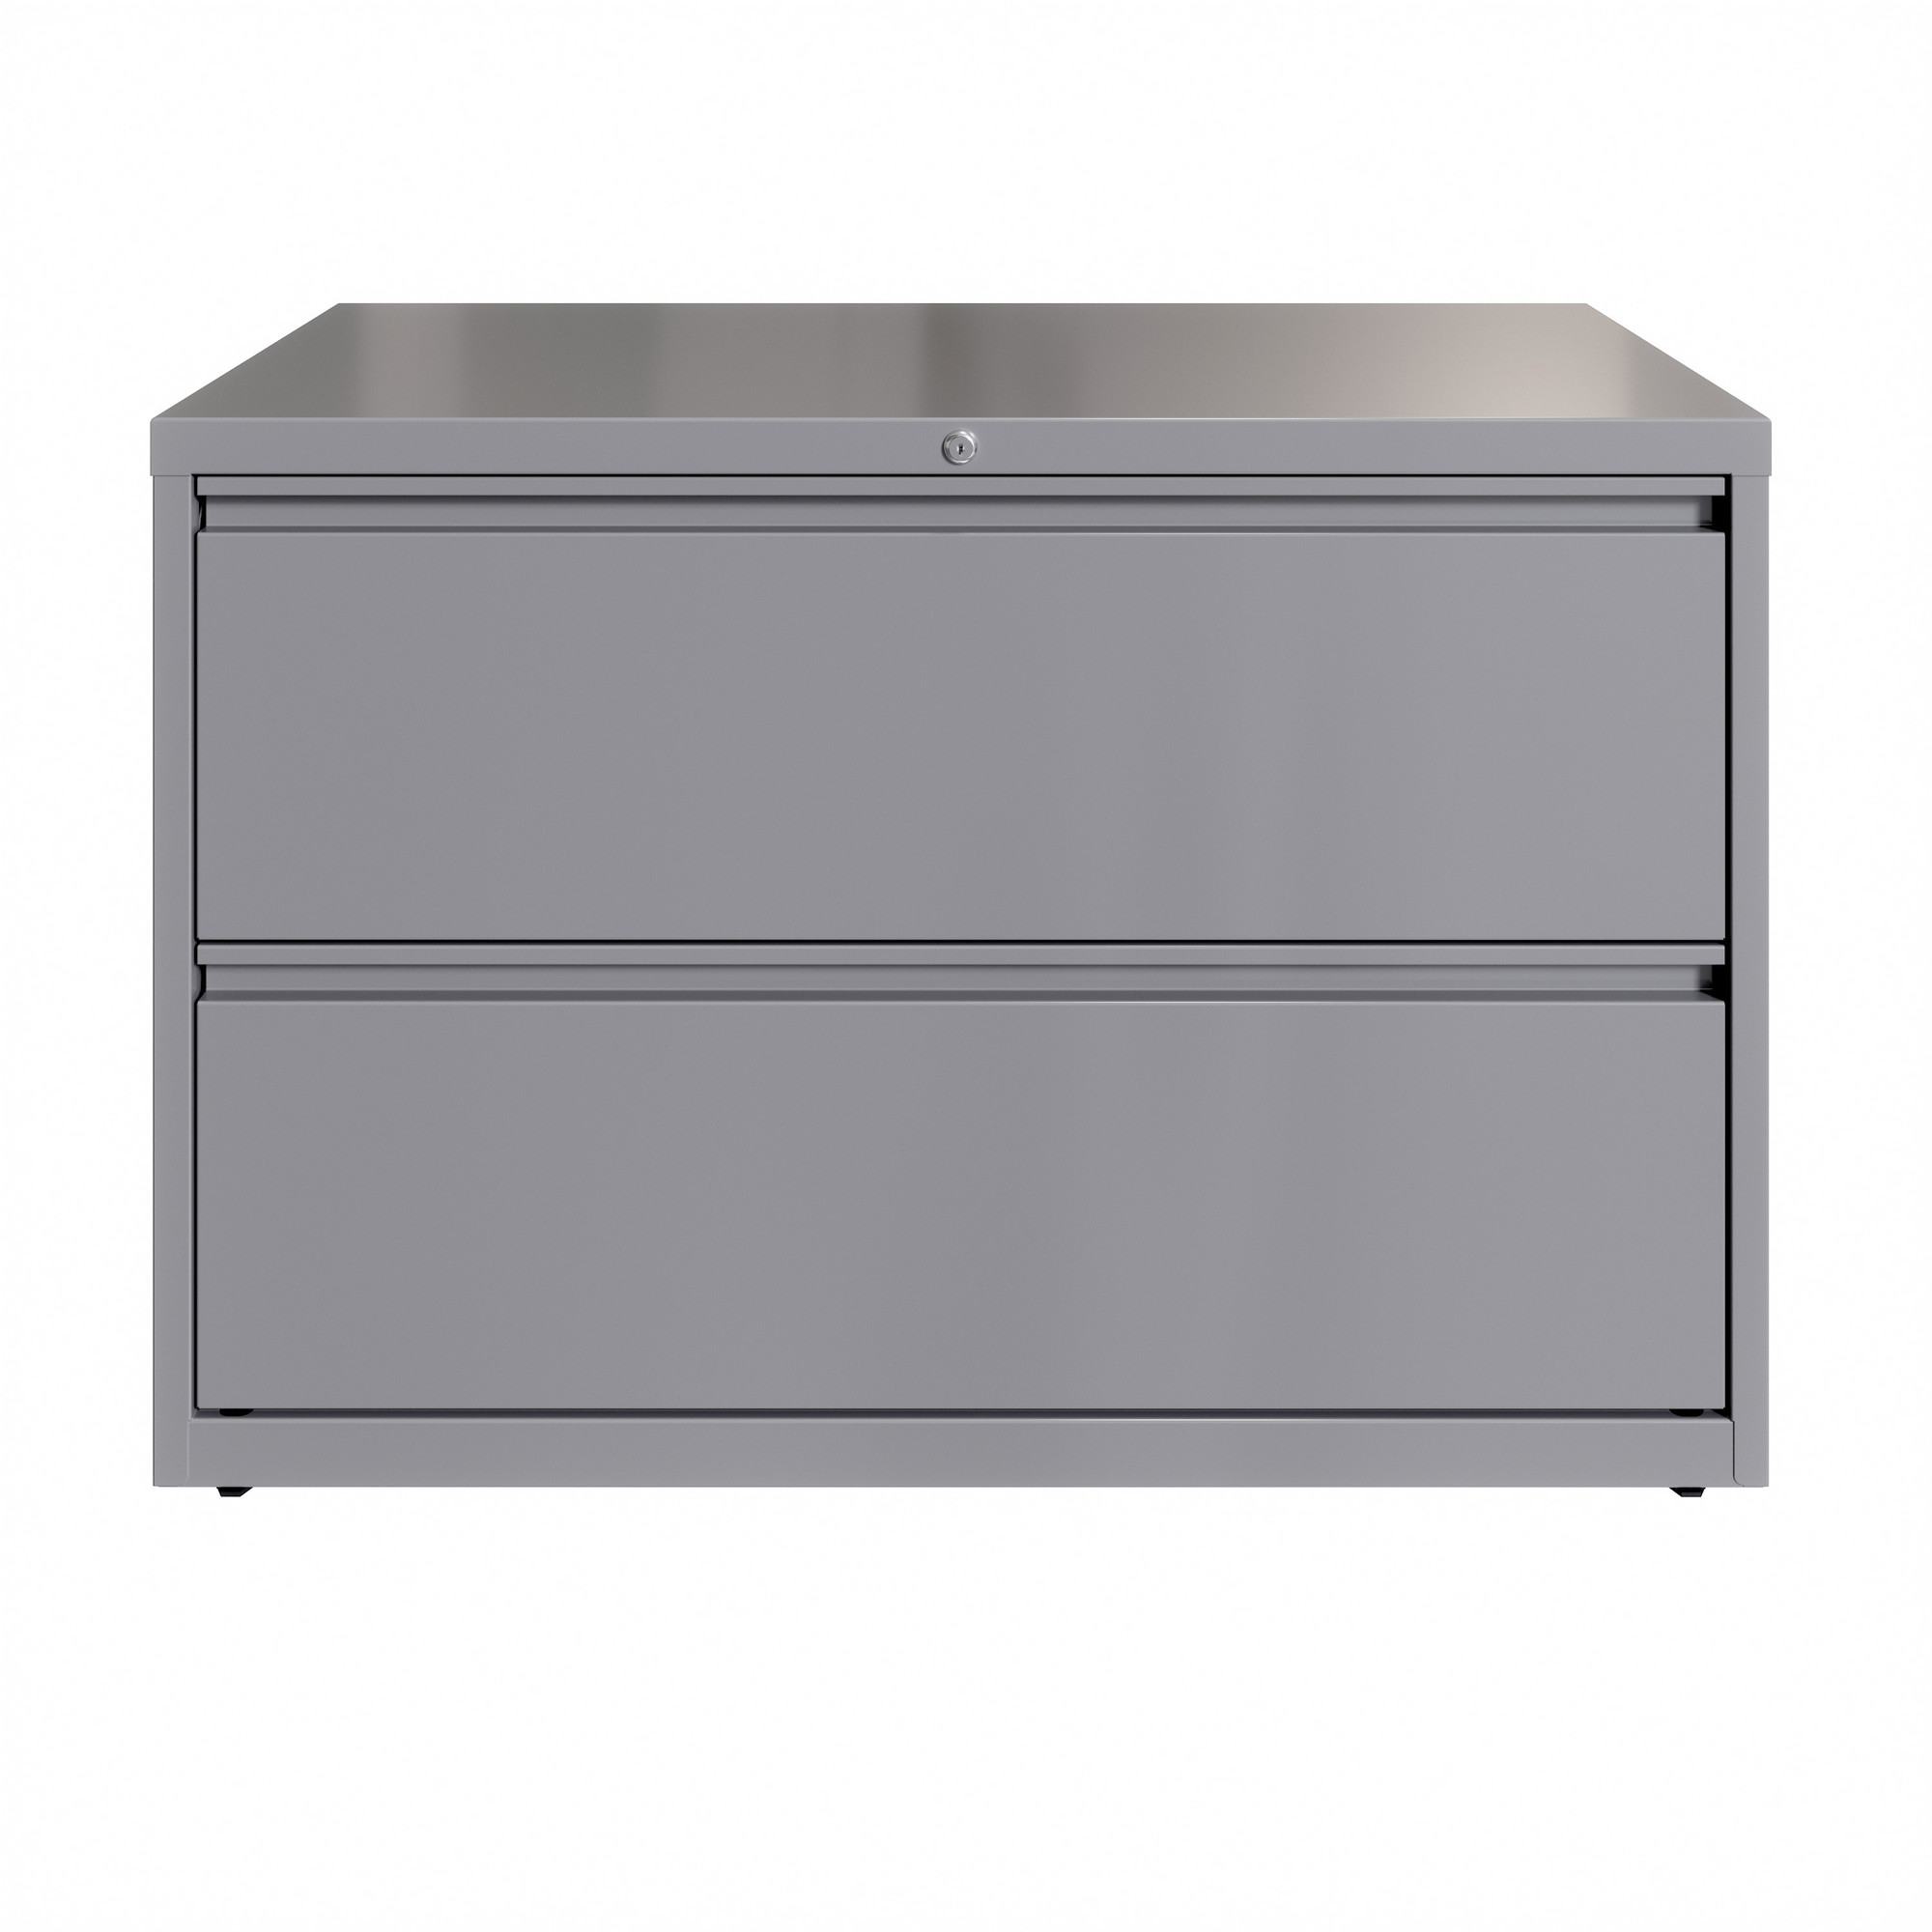 2 Drawer Lateral File Cabinet, Width 42 in, Depth 18.625 in, Height 28 in, Model - Hirsh Industries 23748